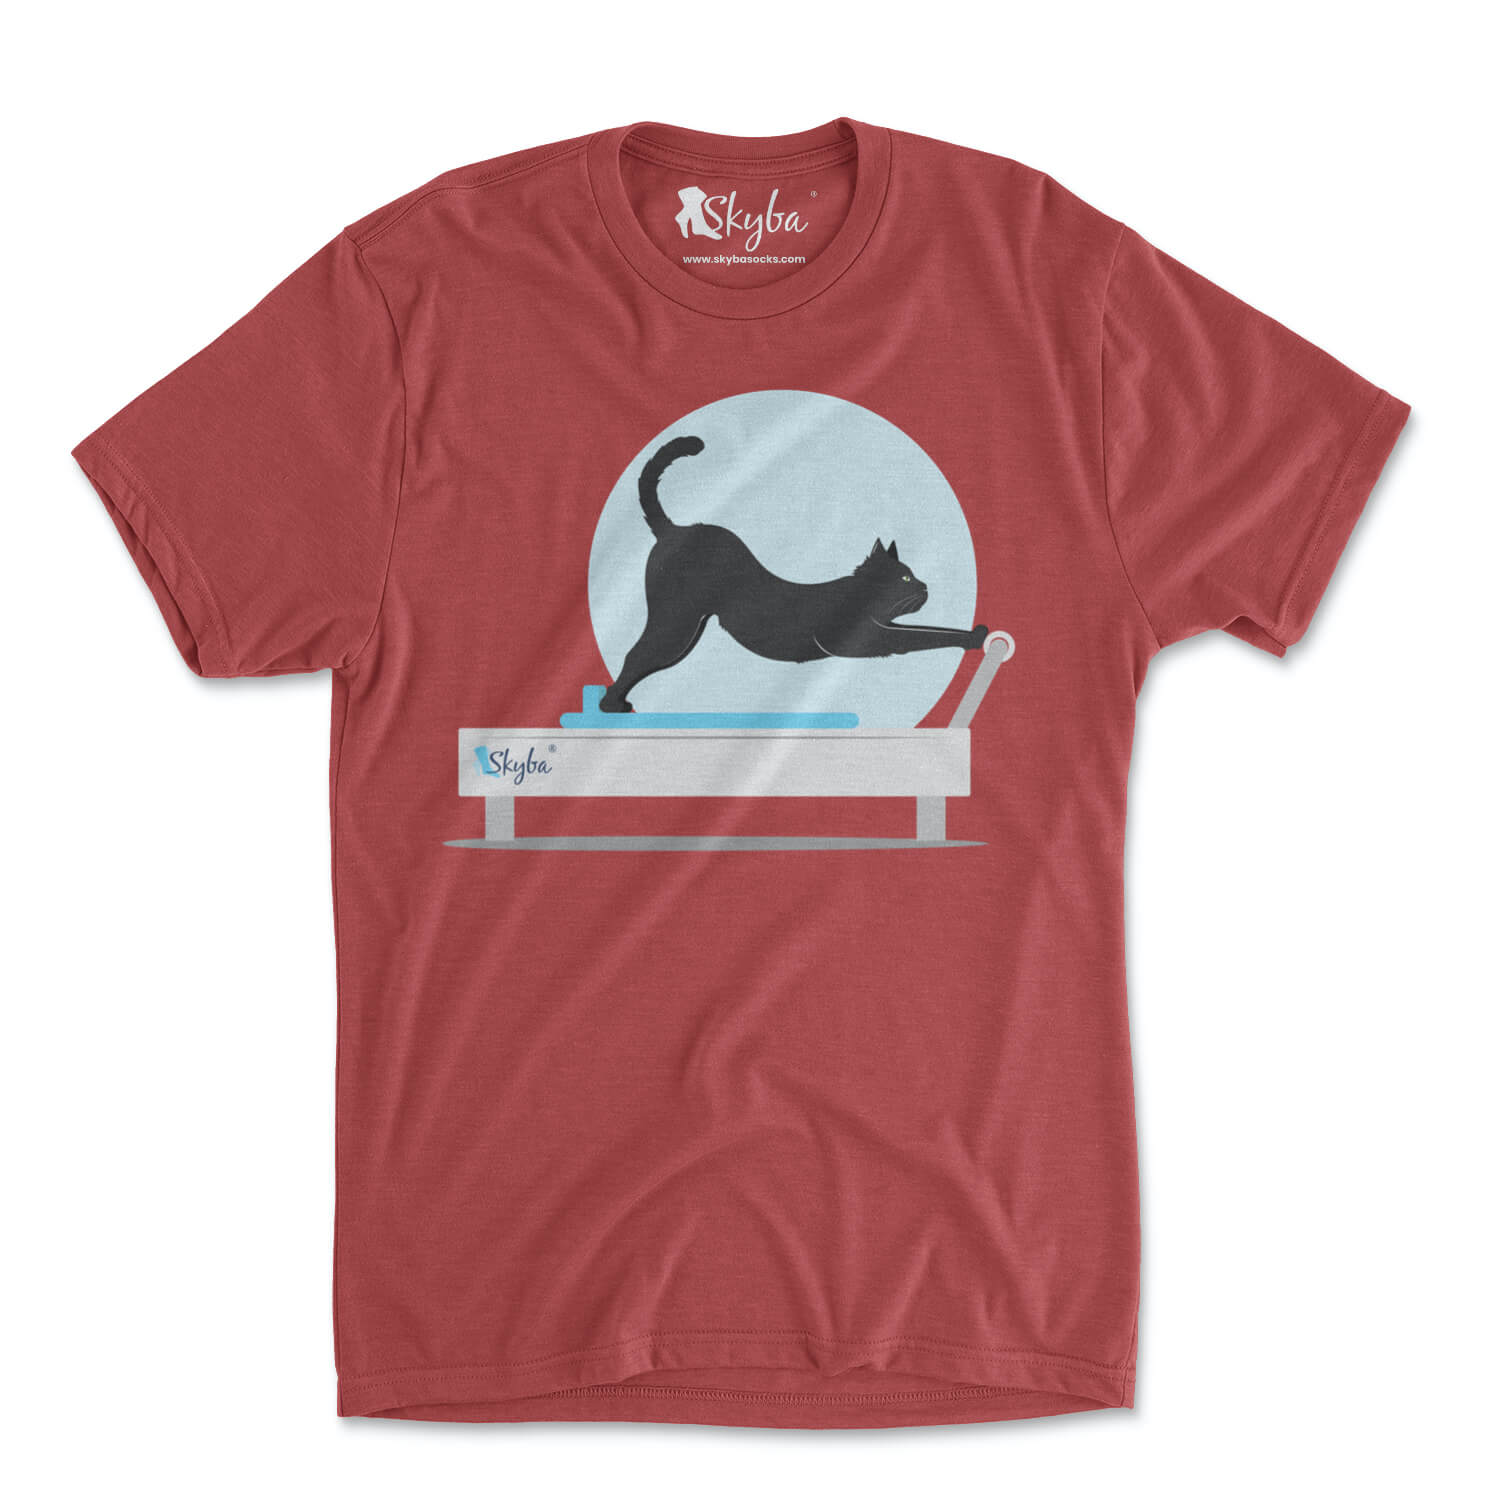 Stretching Cat on Reformer - Tri Blend Tee Skyba Tri-Blend Tee